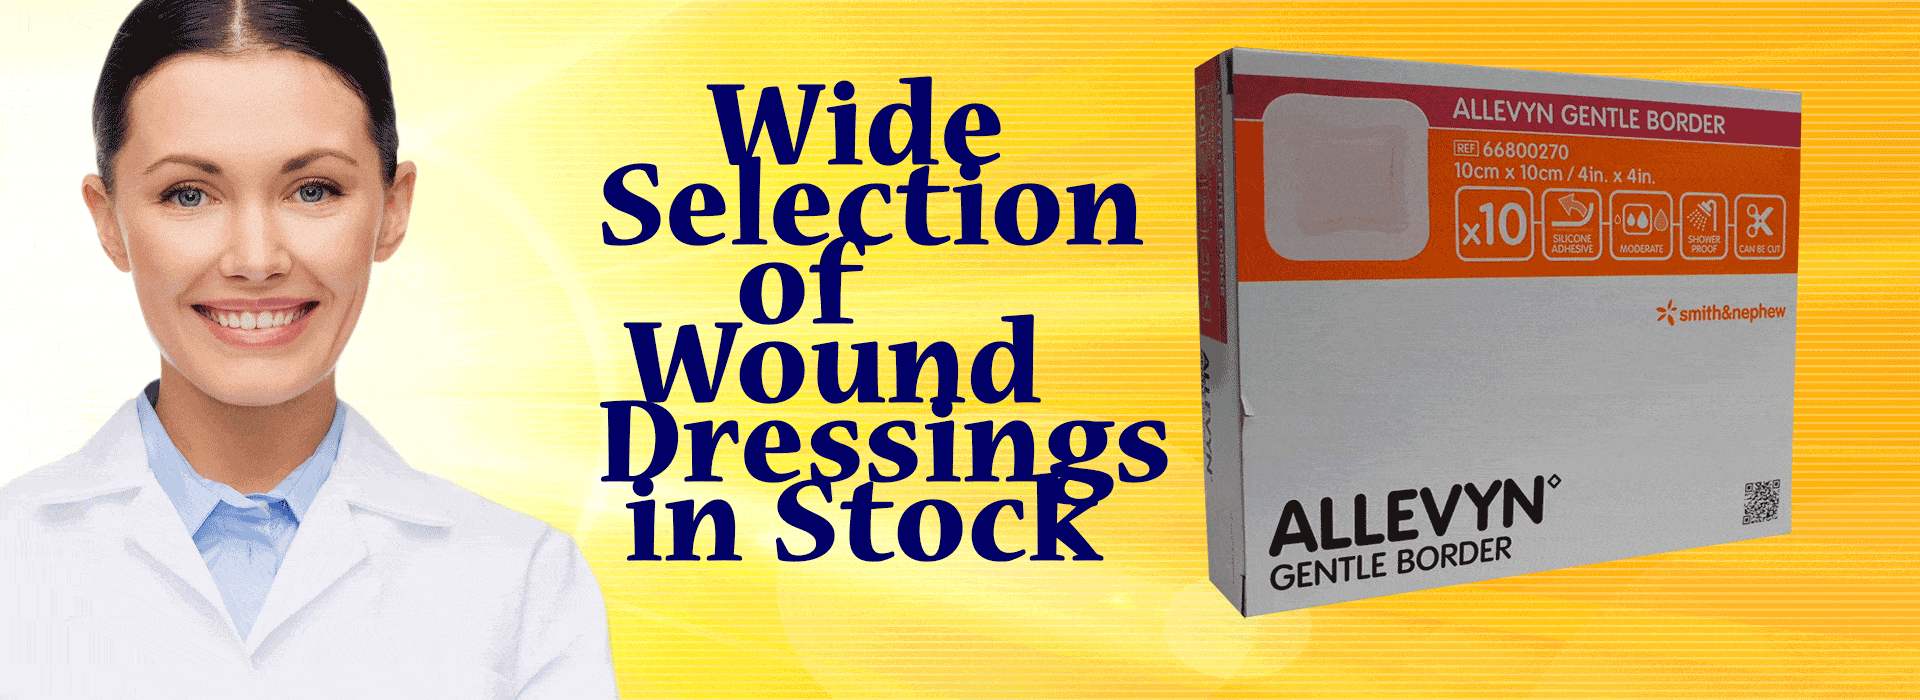 wide selection of wound dressings in stock